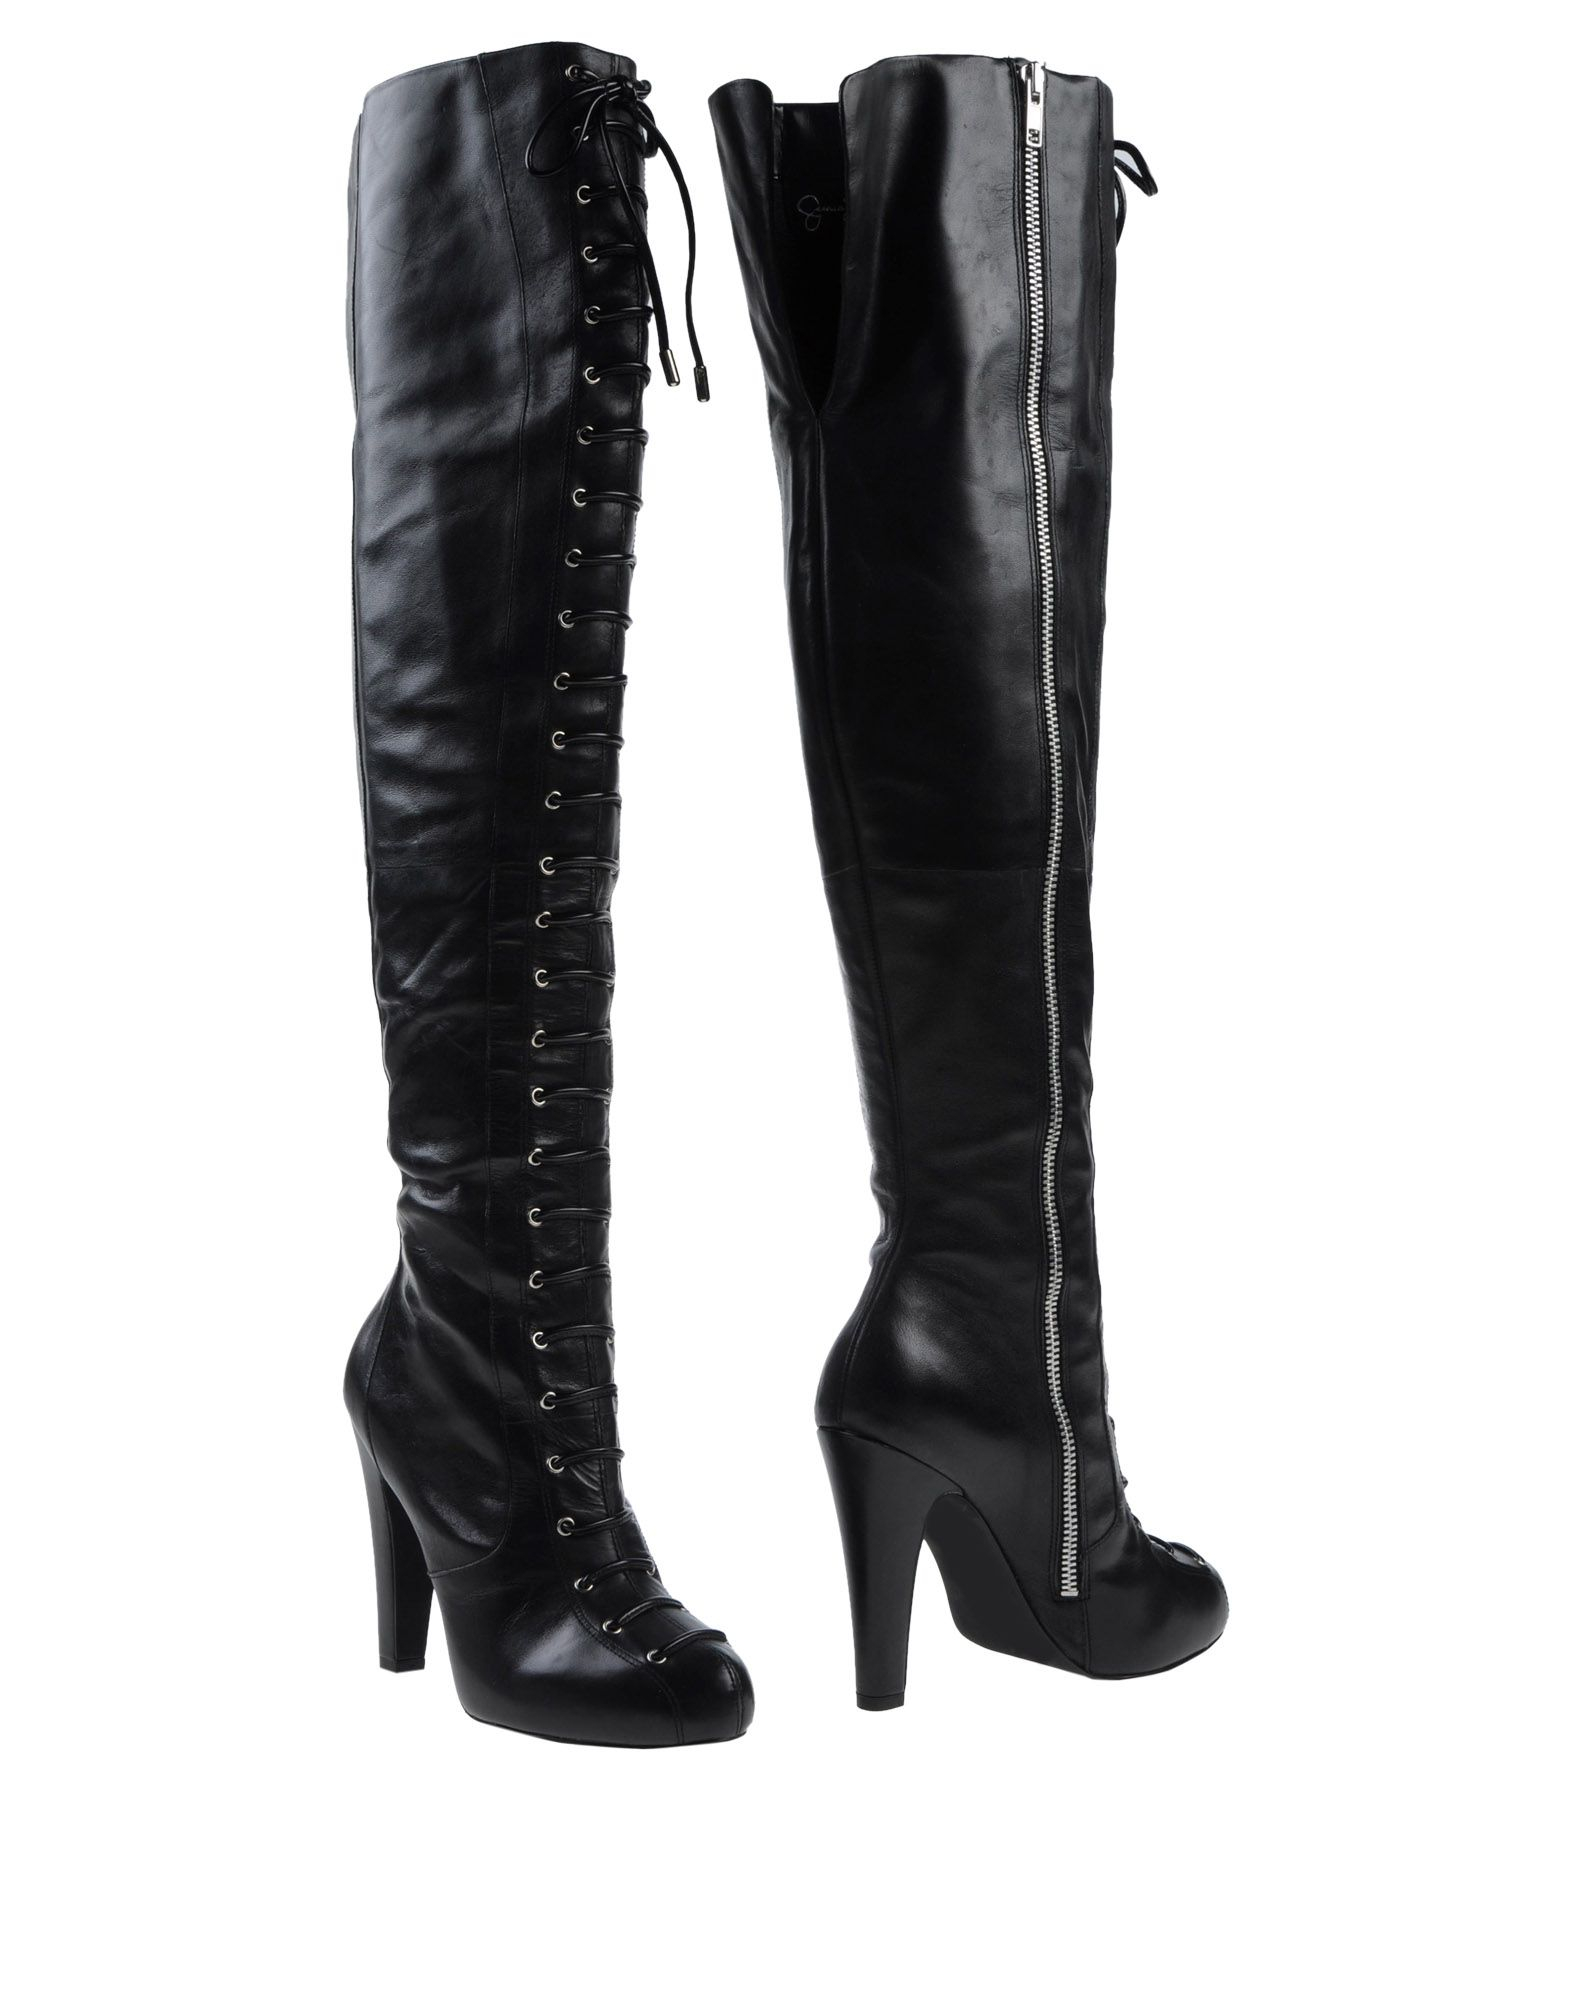 Lyst - Jessica Simpson Lace-Up Leather Over-The-Knee Boots in Black